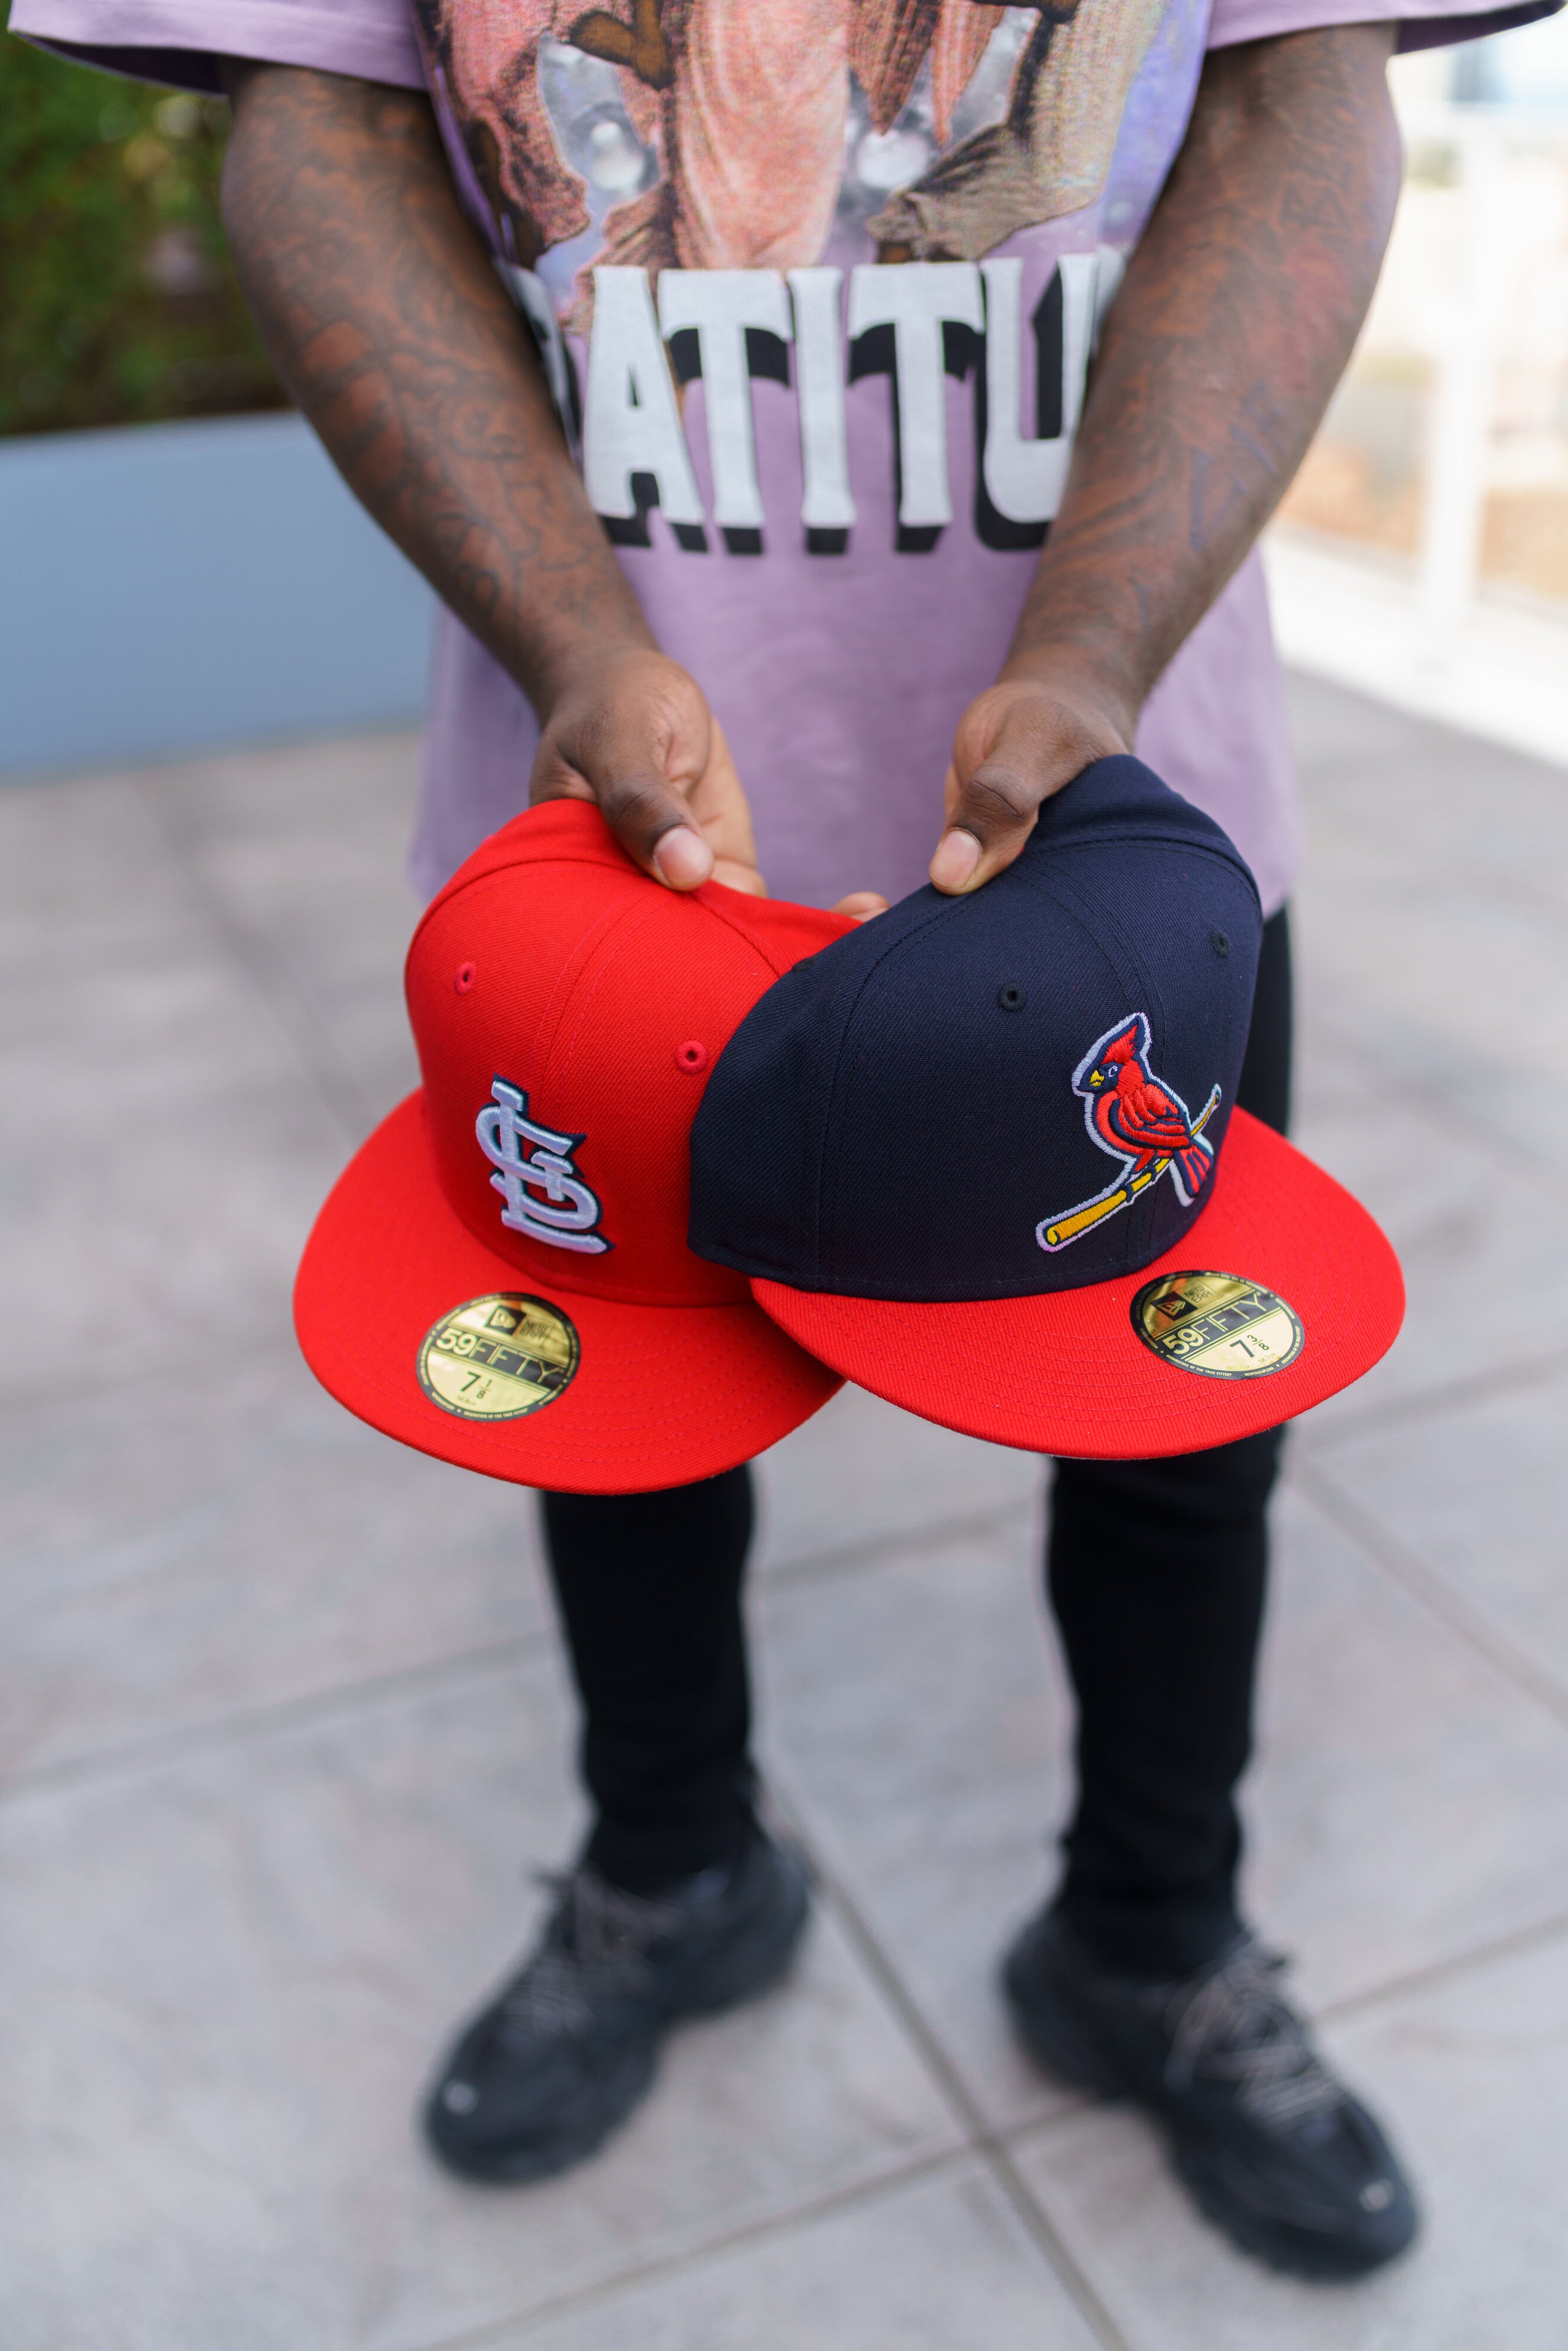 Lids St. Louis Cardinals New Era Sidepatch 59FIFTY Fitted Hat - Black